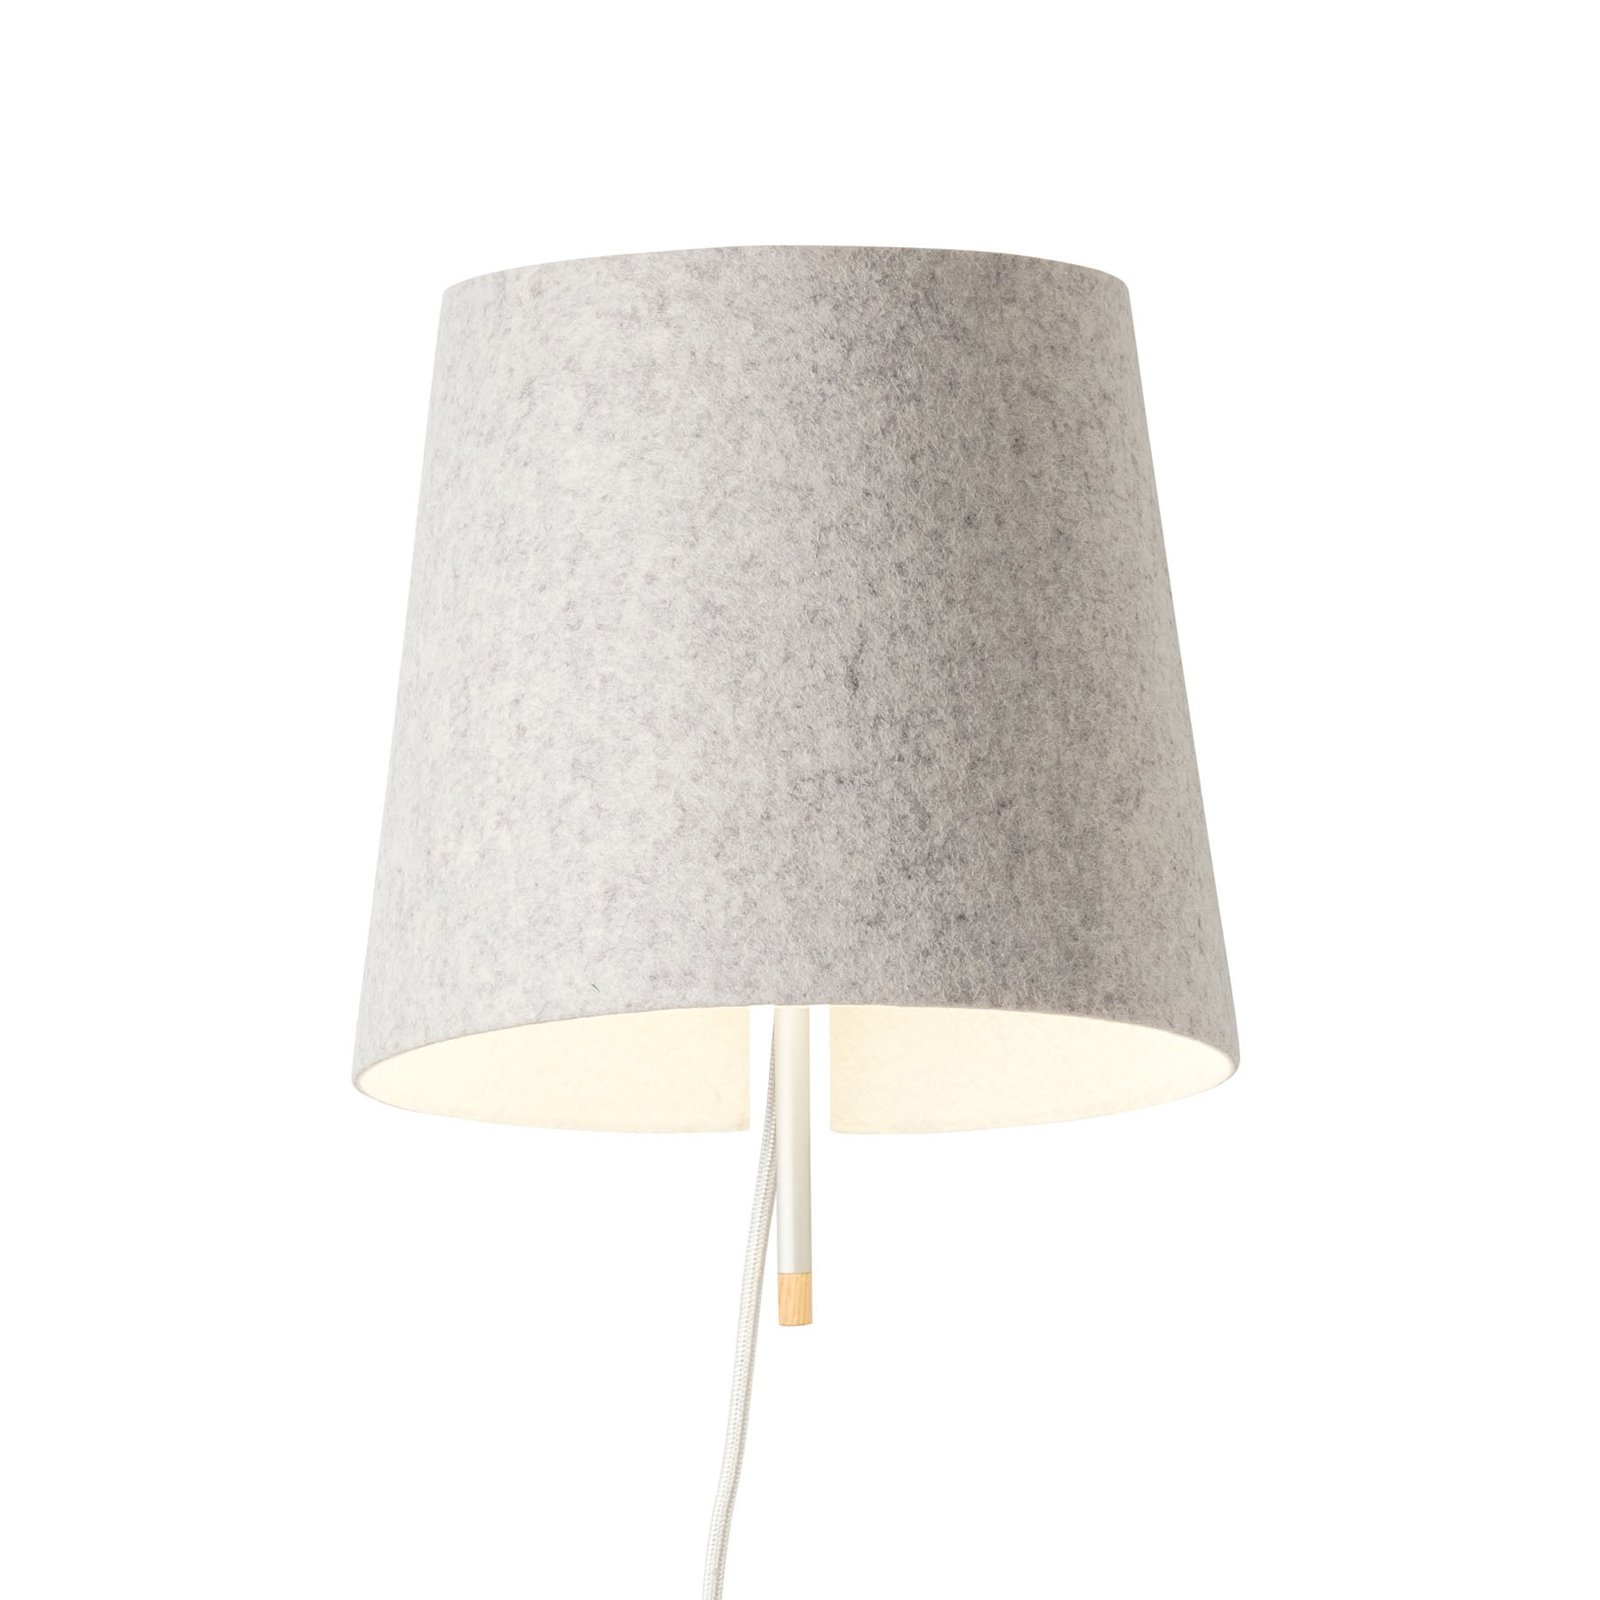 MUUN wall light, power cable, marble/wool white